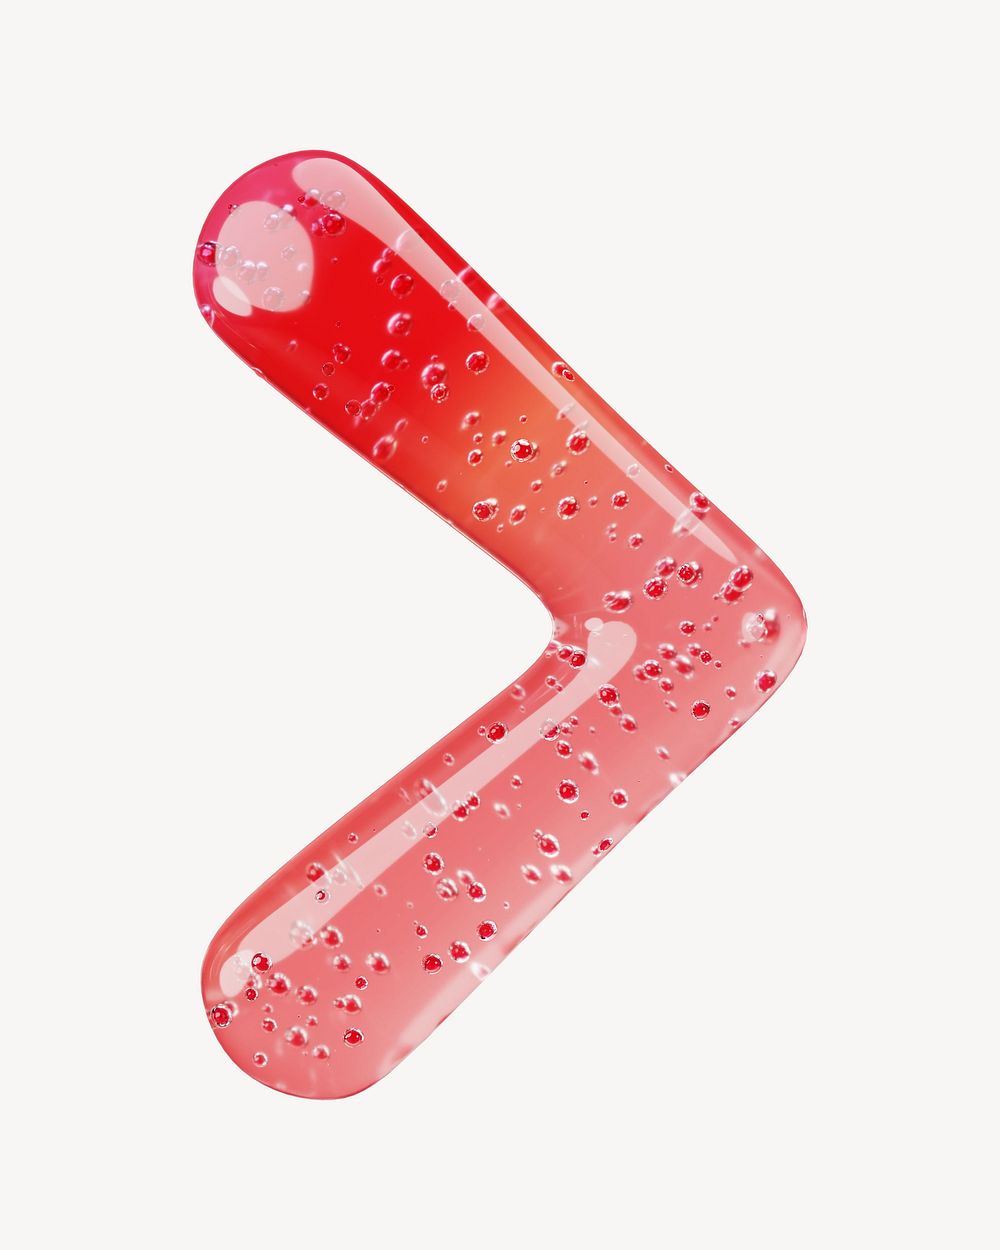 Less than sign, 3D red jelly symbol illustration